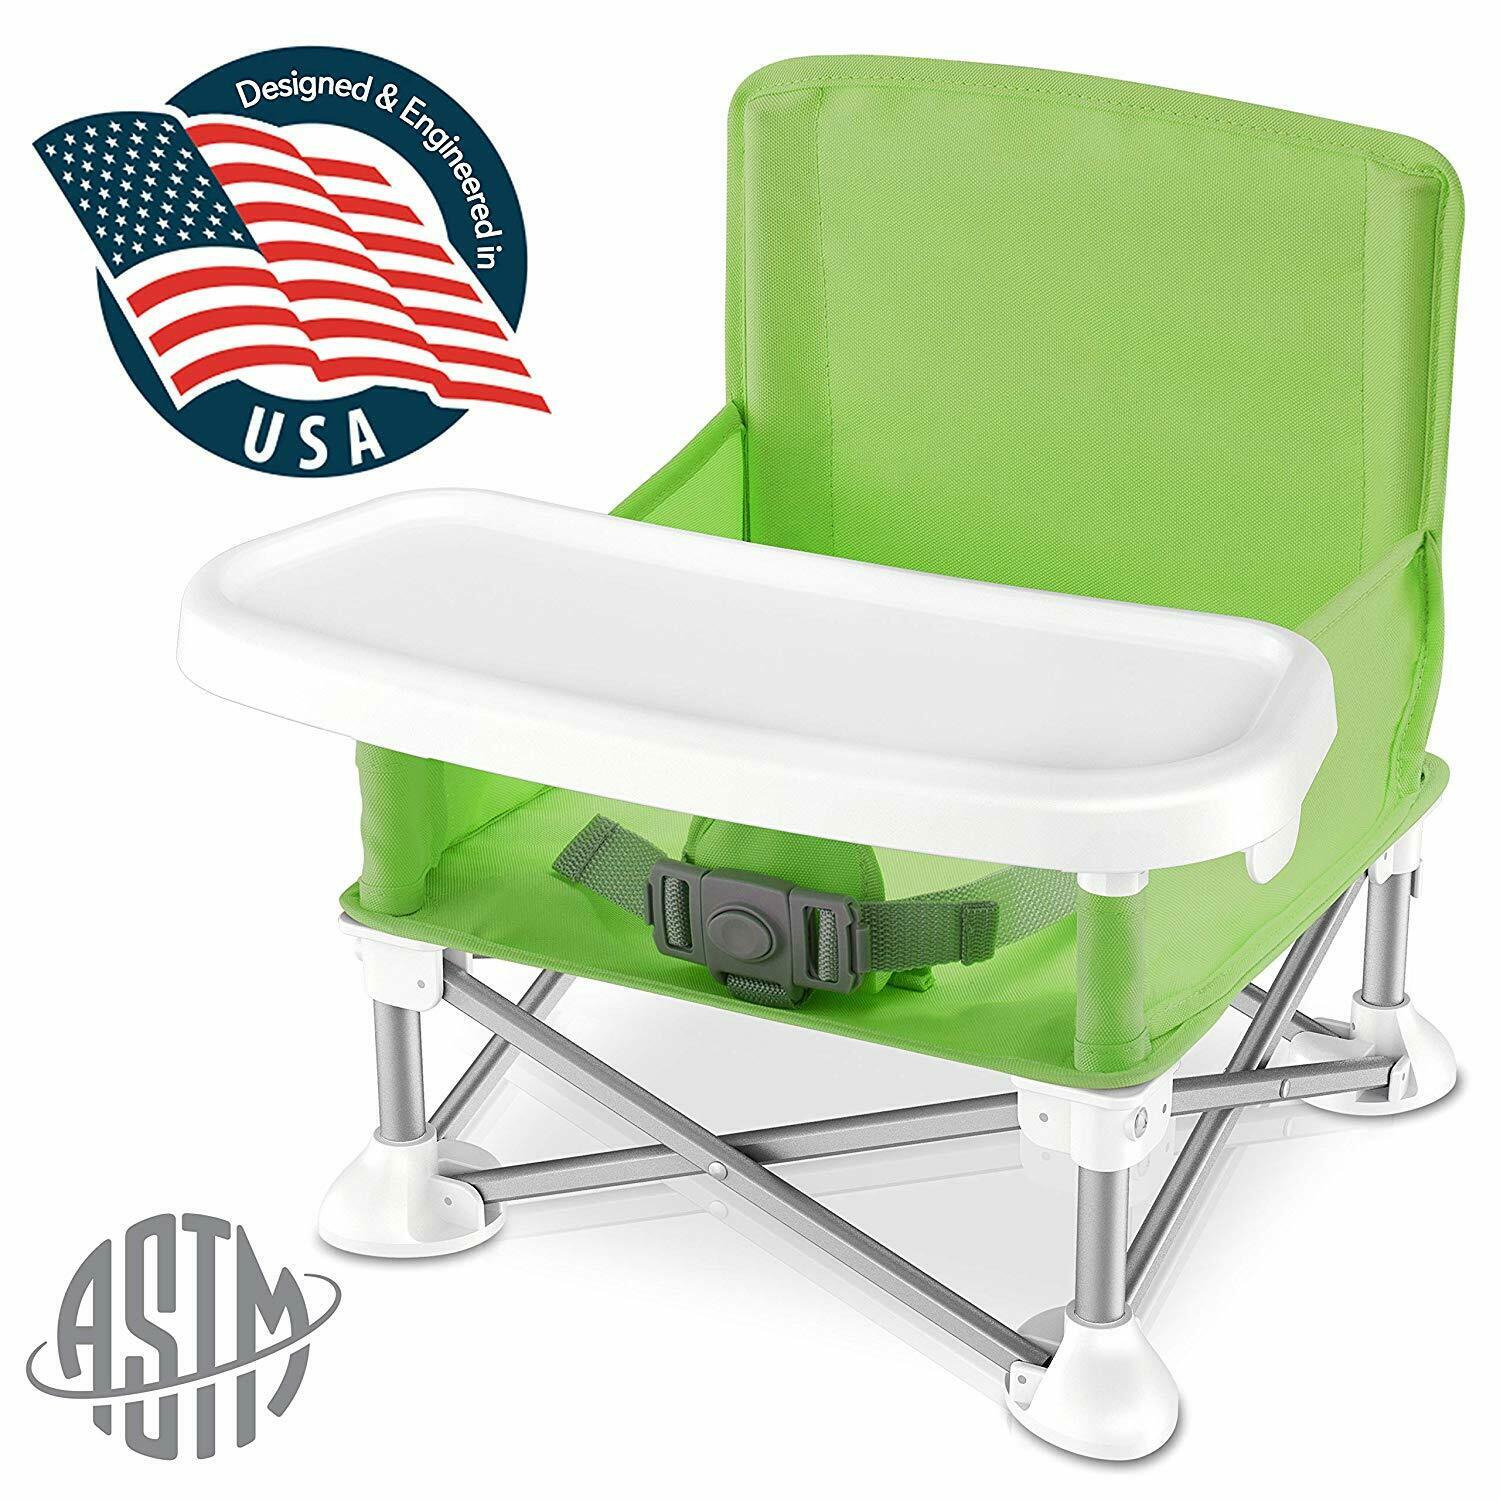 SereneLife SLBS66G Portable Baby, Toddler Seat Booster High Chair